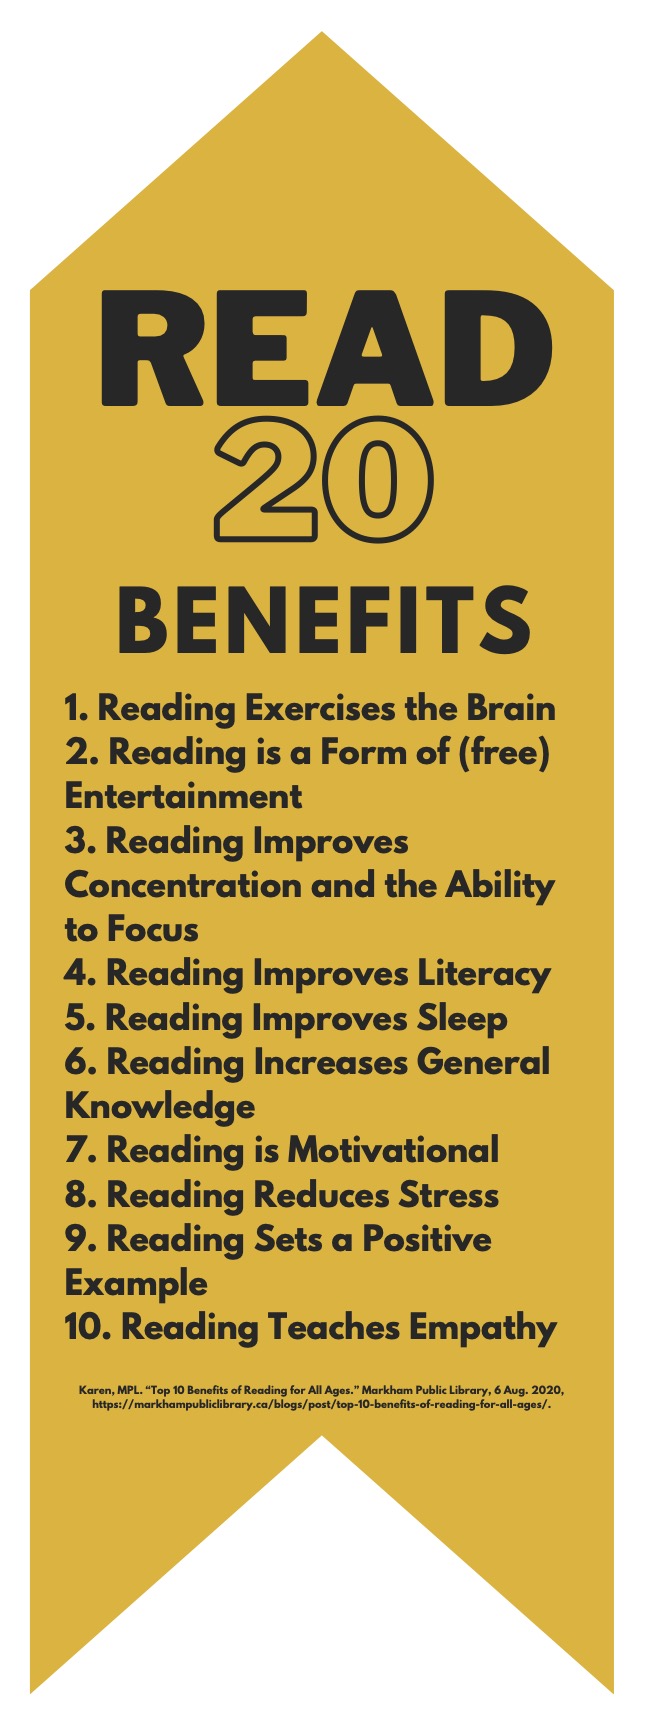 READ BENEFITS Reading Exercises the Brain Reading is a Form of Entertainment Reading Improves Concentration and the Ability to Focus Reading Improves Literacy Reading Improves Sleep Reading Increases General Knowledge Reading is Motivational Reading Reduces Stress Reading Sets a Positive Example Reading Teaches Empathy 1. 2. 3. 4. 5. 6. 7. 8. 9. 10. Karen, MPL. “Top 10 Benefits of Reading for All Ages.” Markham Public Library, 6 Aug. 2020, https://markhampubliclibrary.ca/blogs/post/top-10-benefits-of-reading-for-all-ages/.